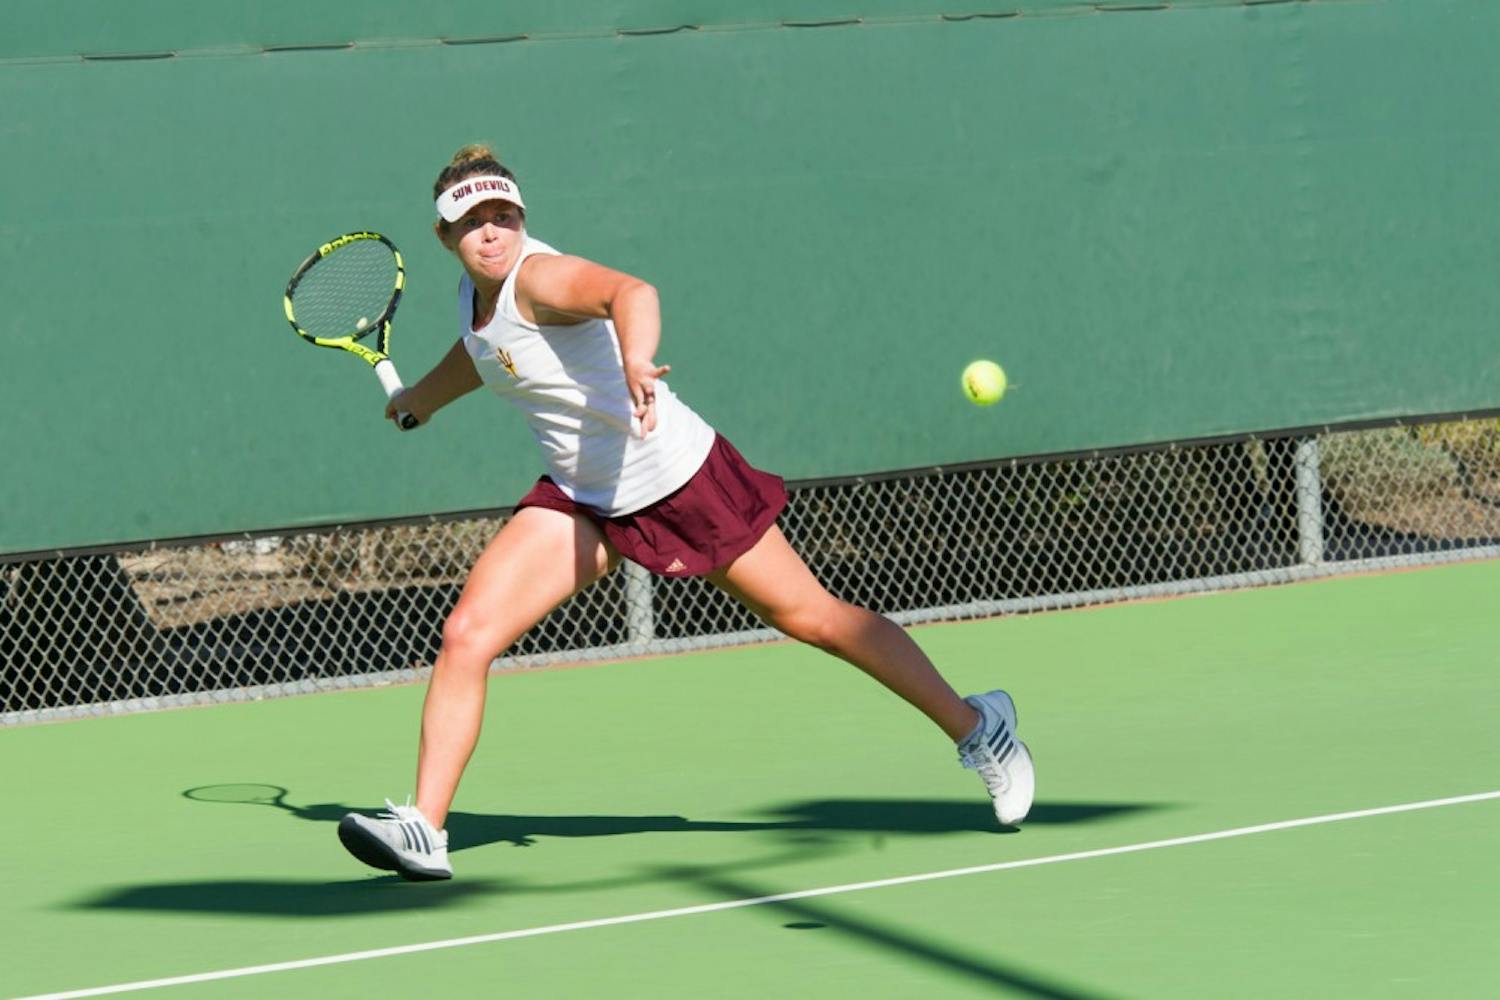 Gussie O'Sullivan junior returns the volley during the match against  the Princeton Tigers on Thursday, Jan. 28, 2016, at Whiteman Tennis  Center in Tempe, AZ.